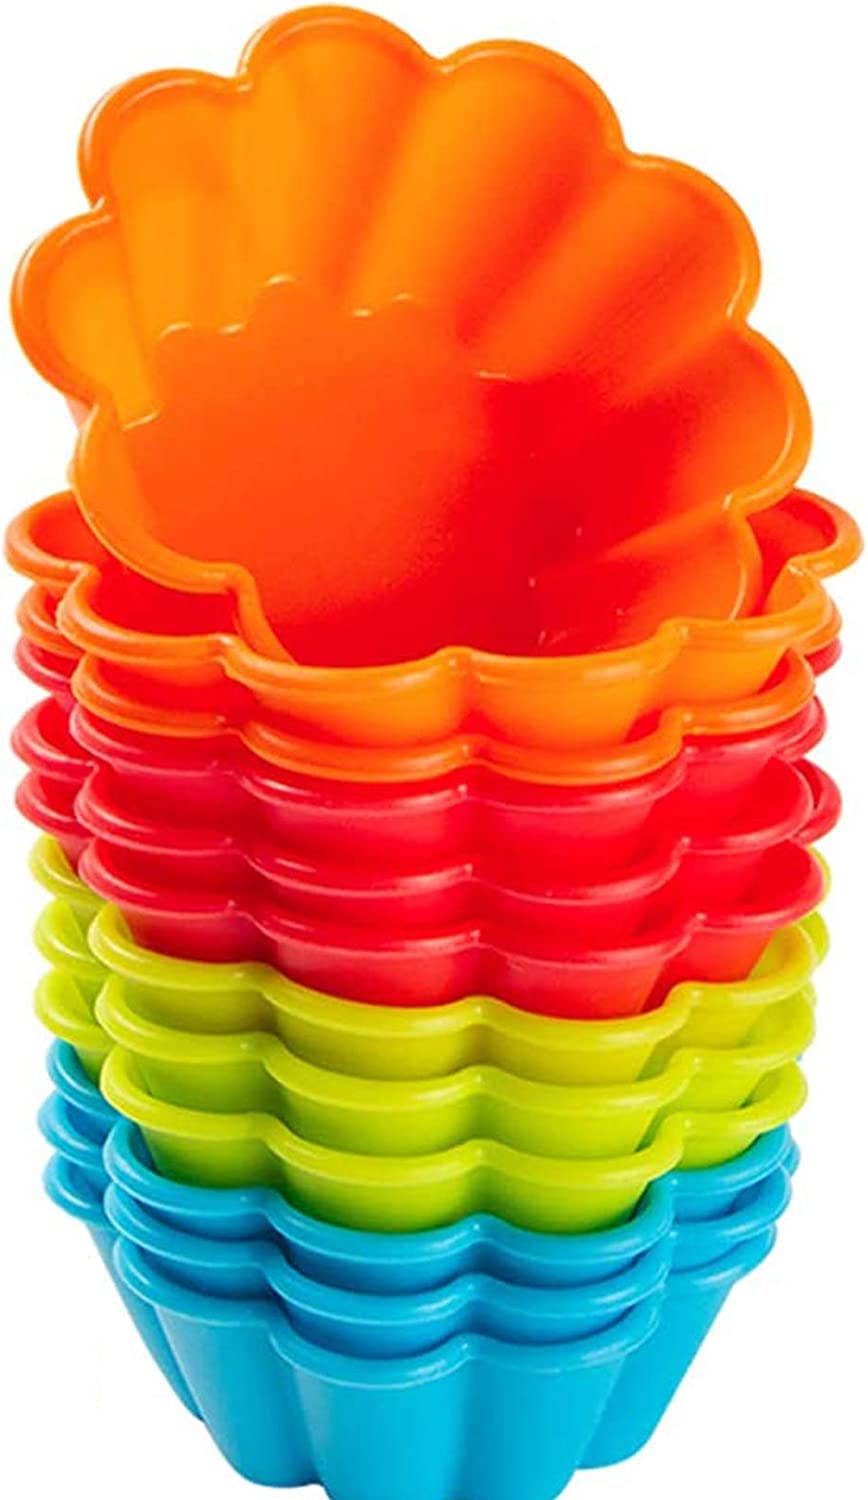 Silicone Baking Cups